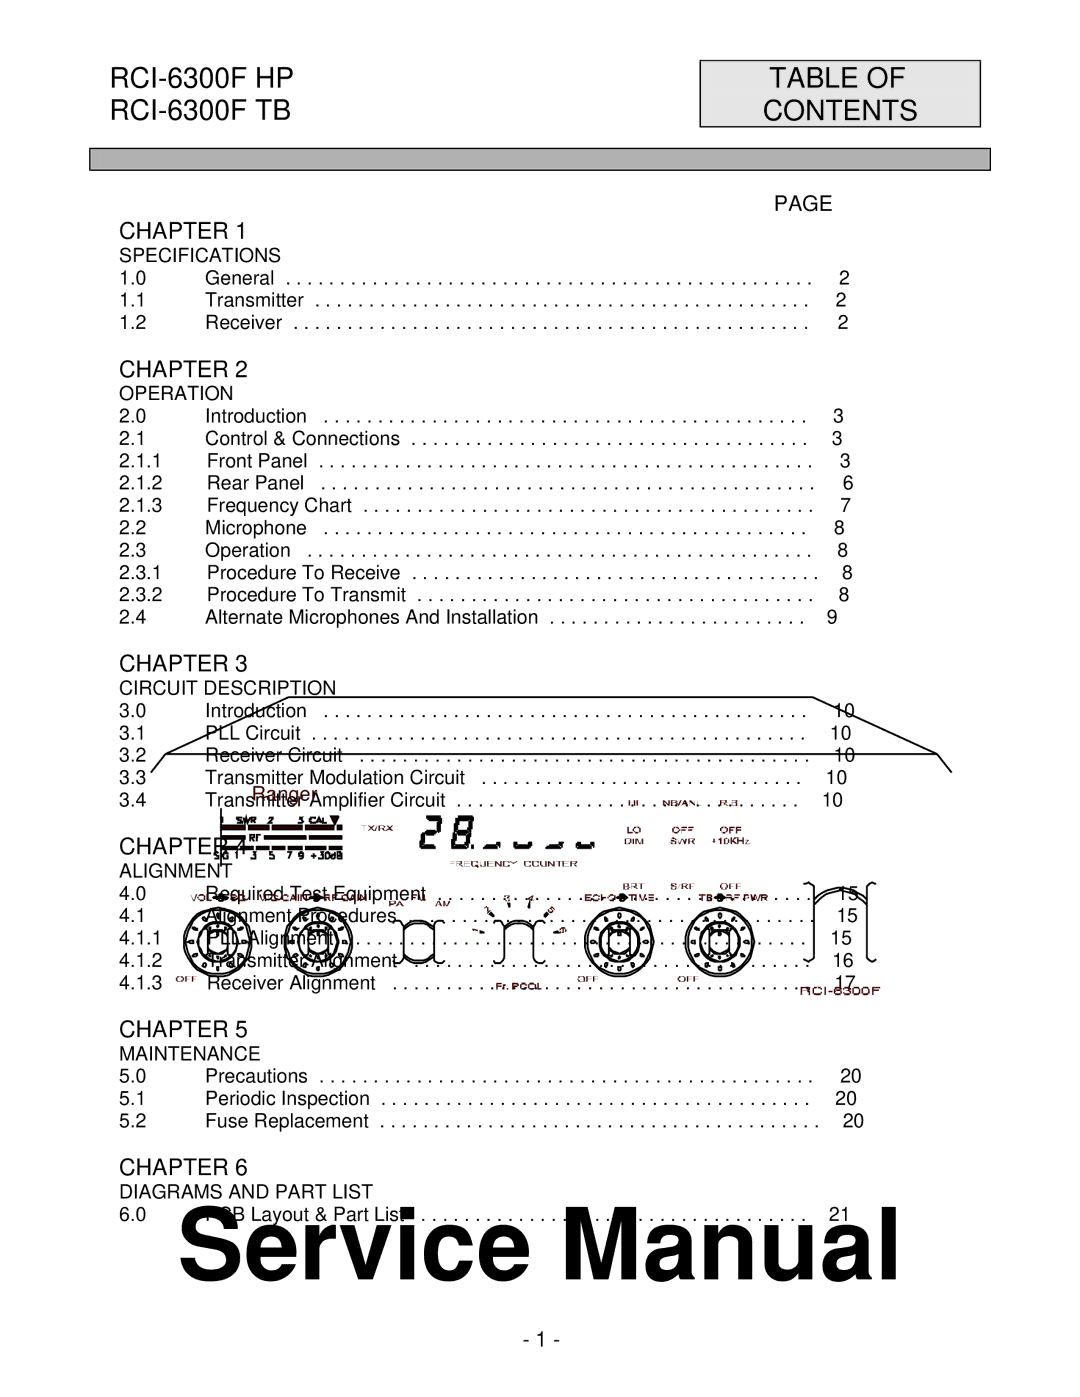 Ranger RCI-6300F HP, RCI-6300F TB service manual Table of Contents 